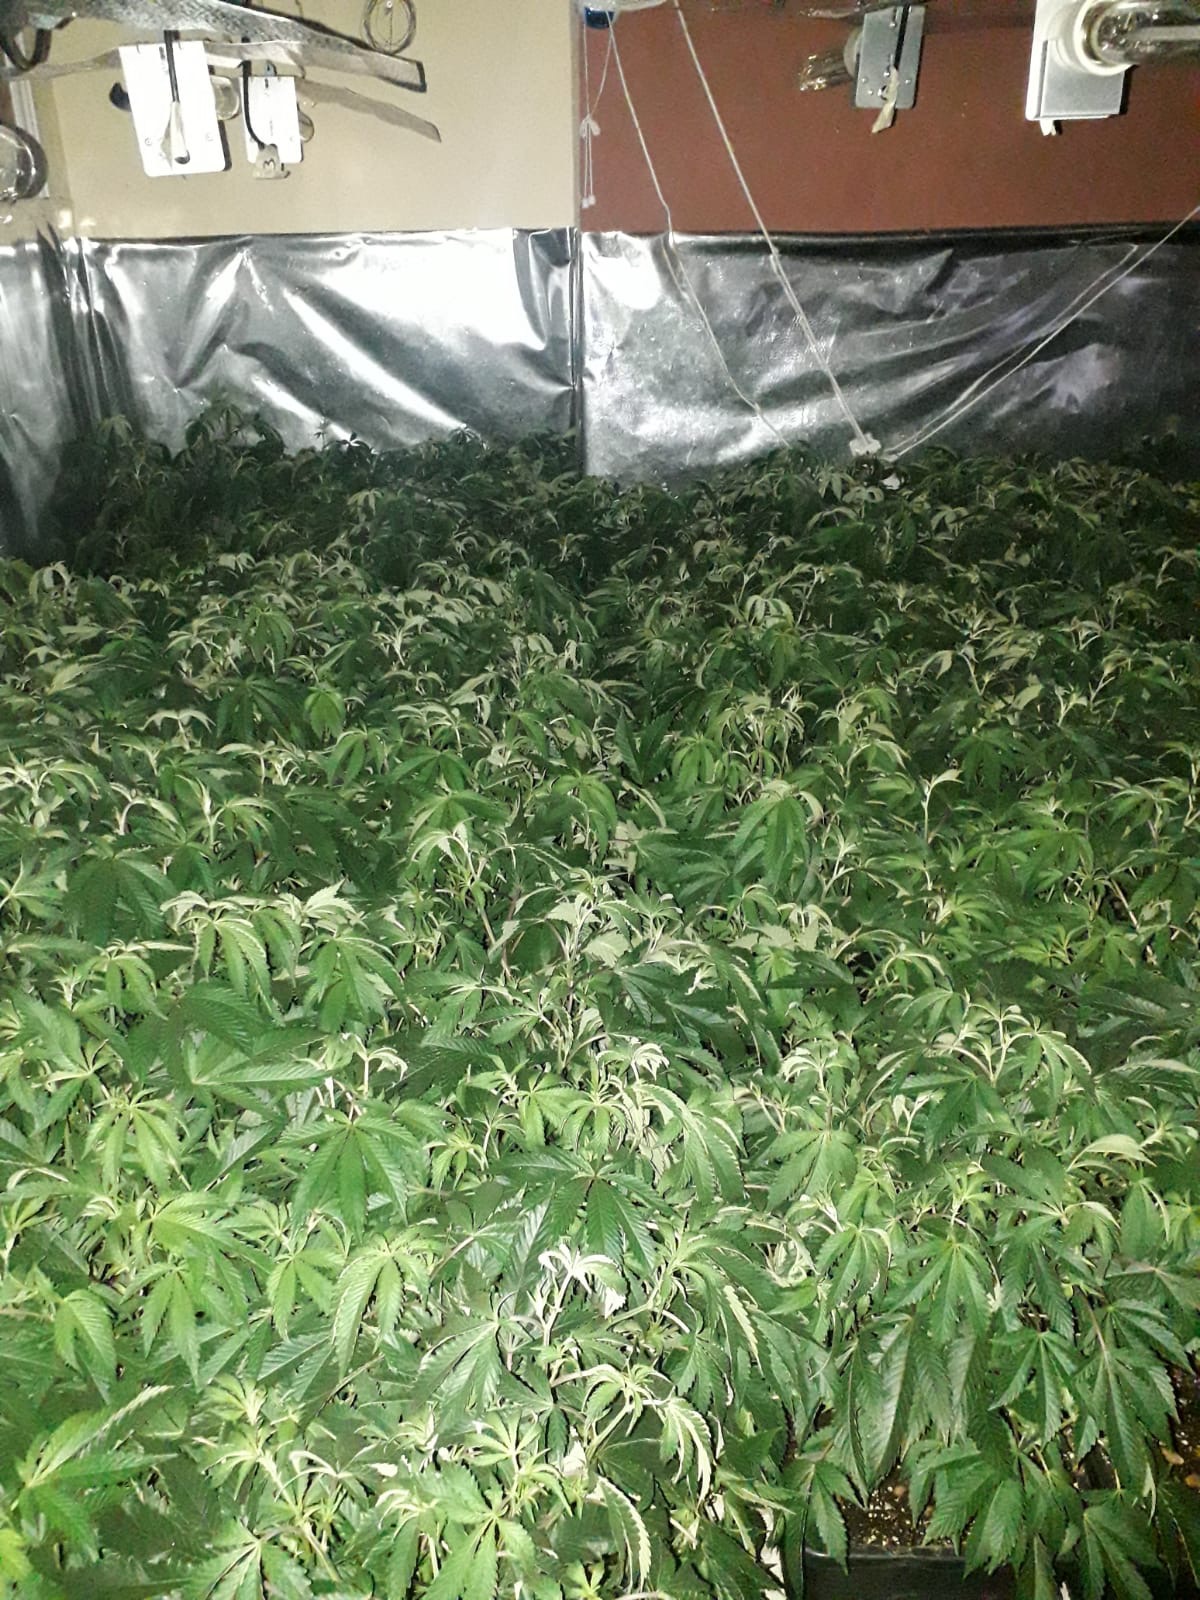 Five males due in court after cannabis farm discovery